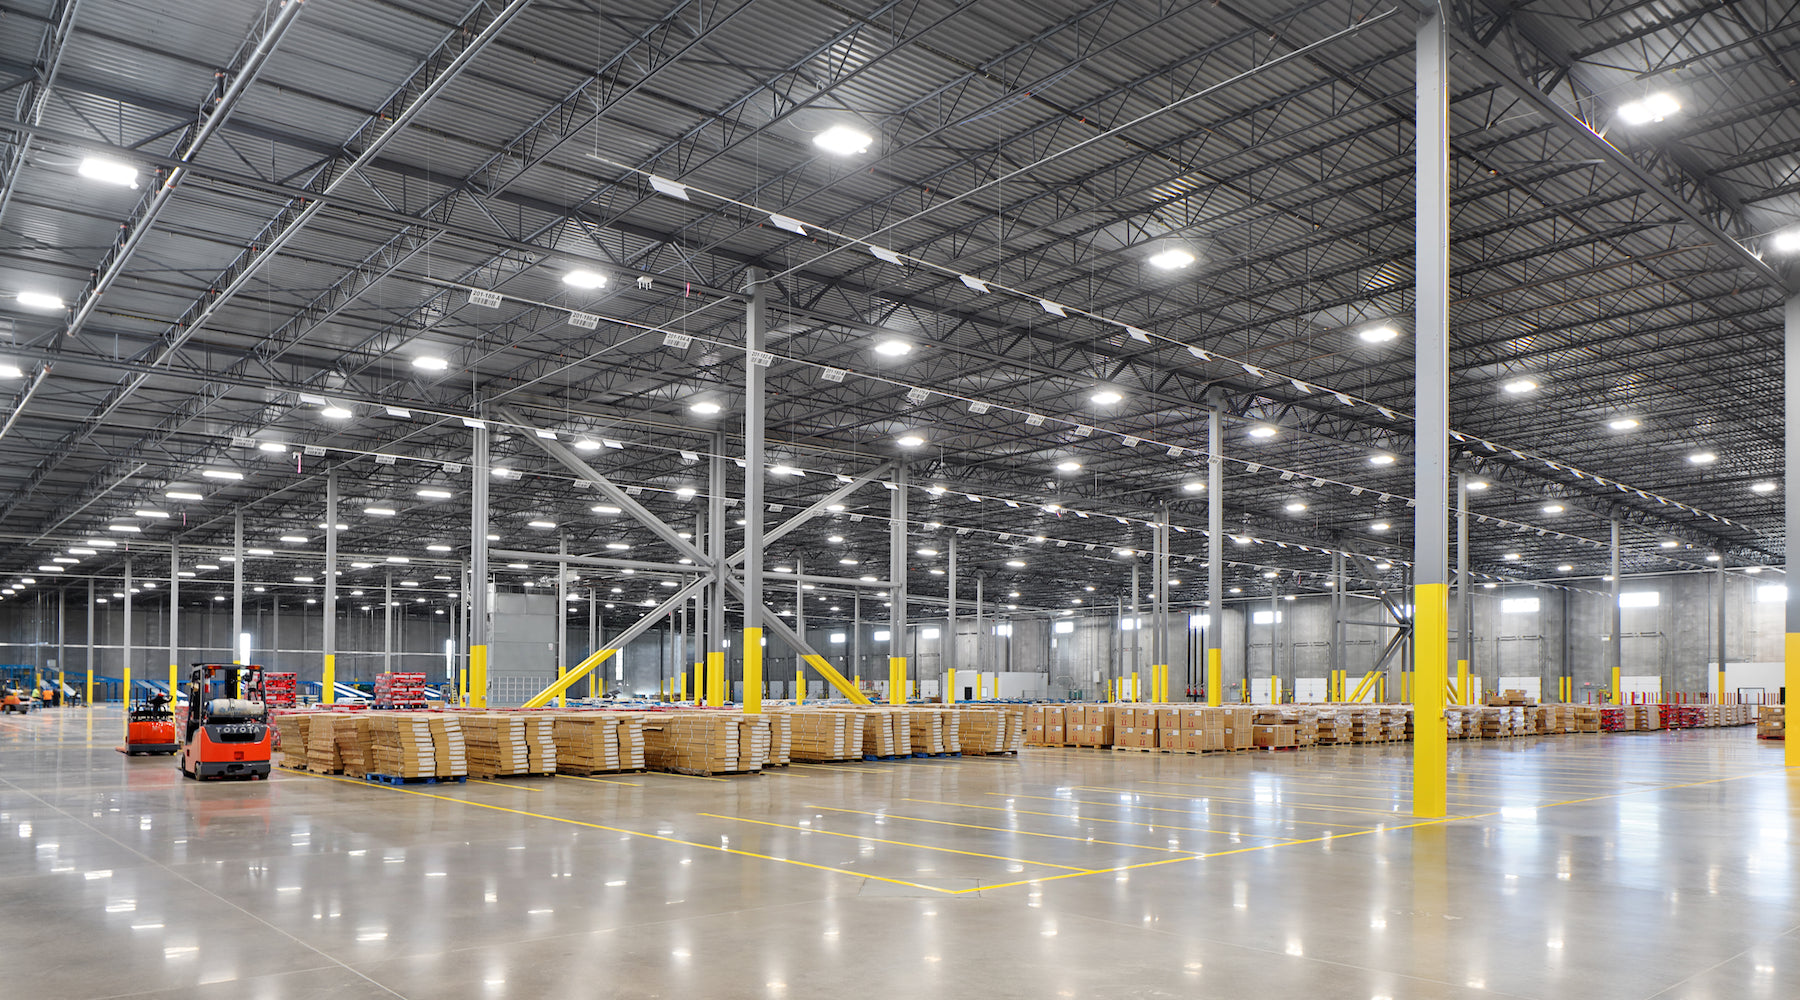 Commercial lighting fixtures installed in a warehouse